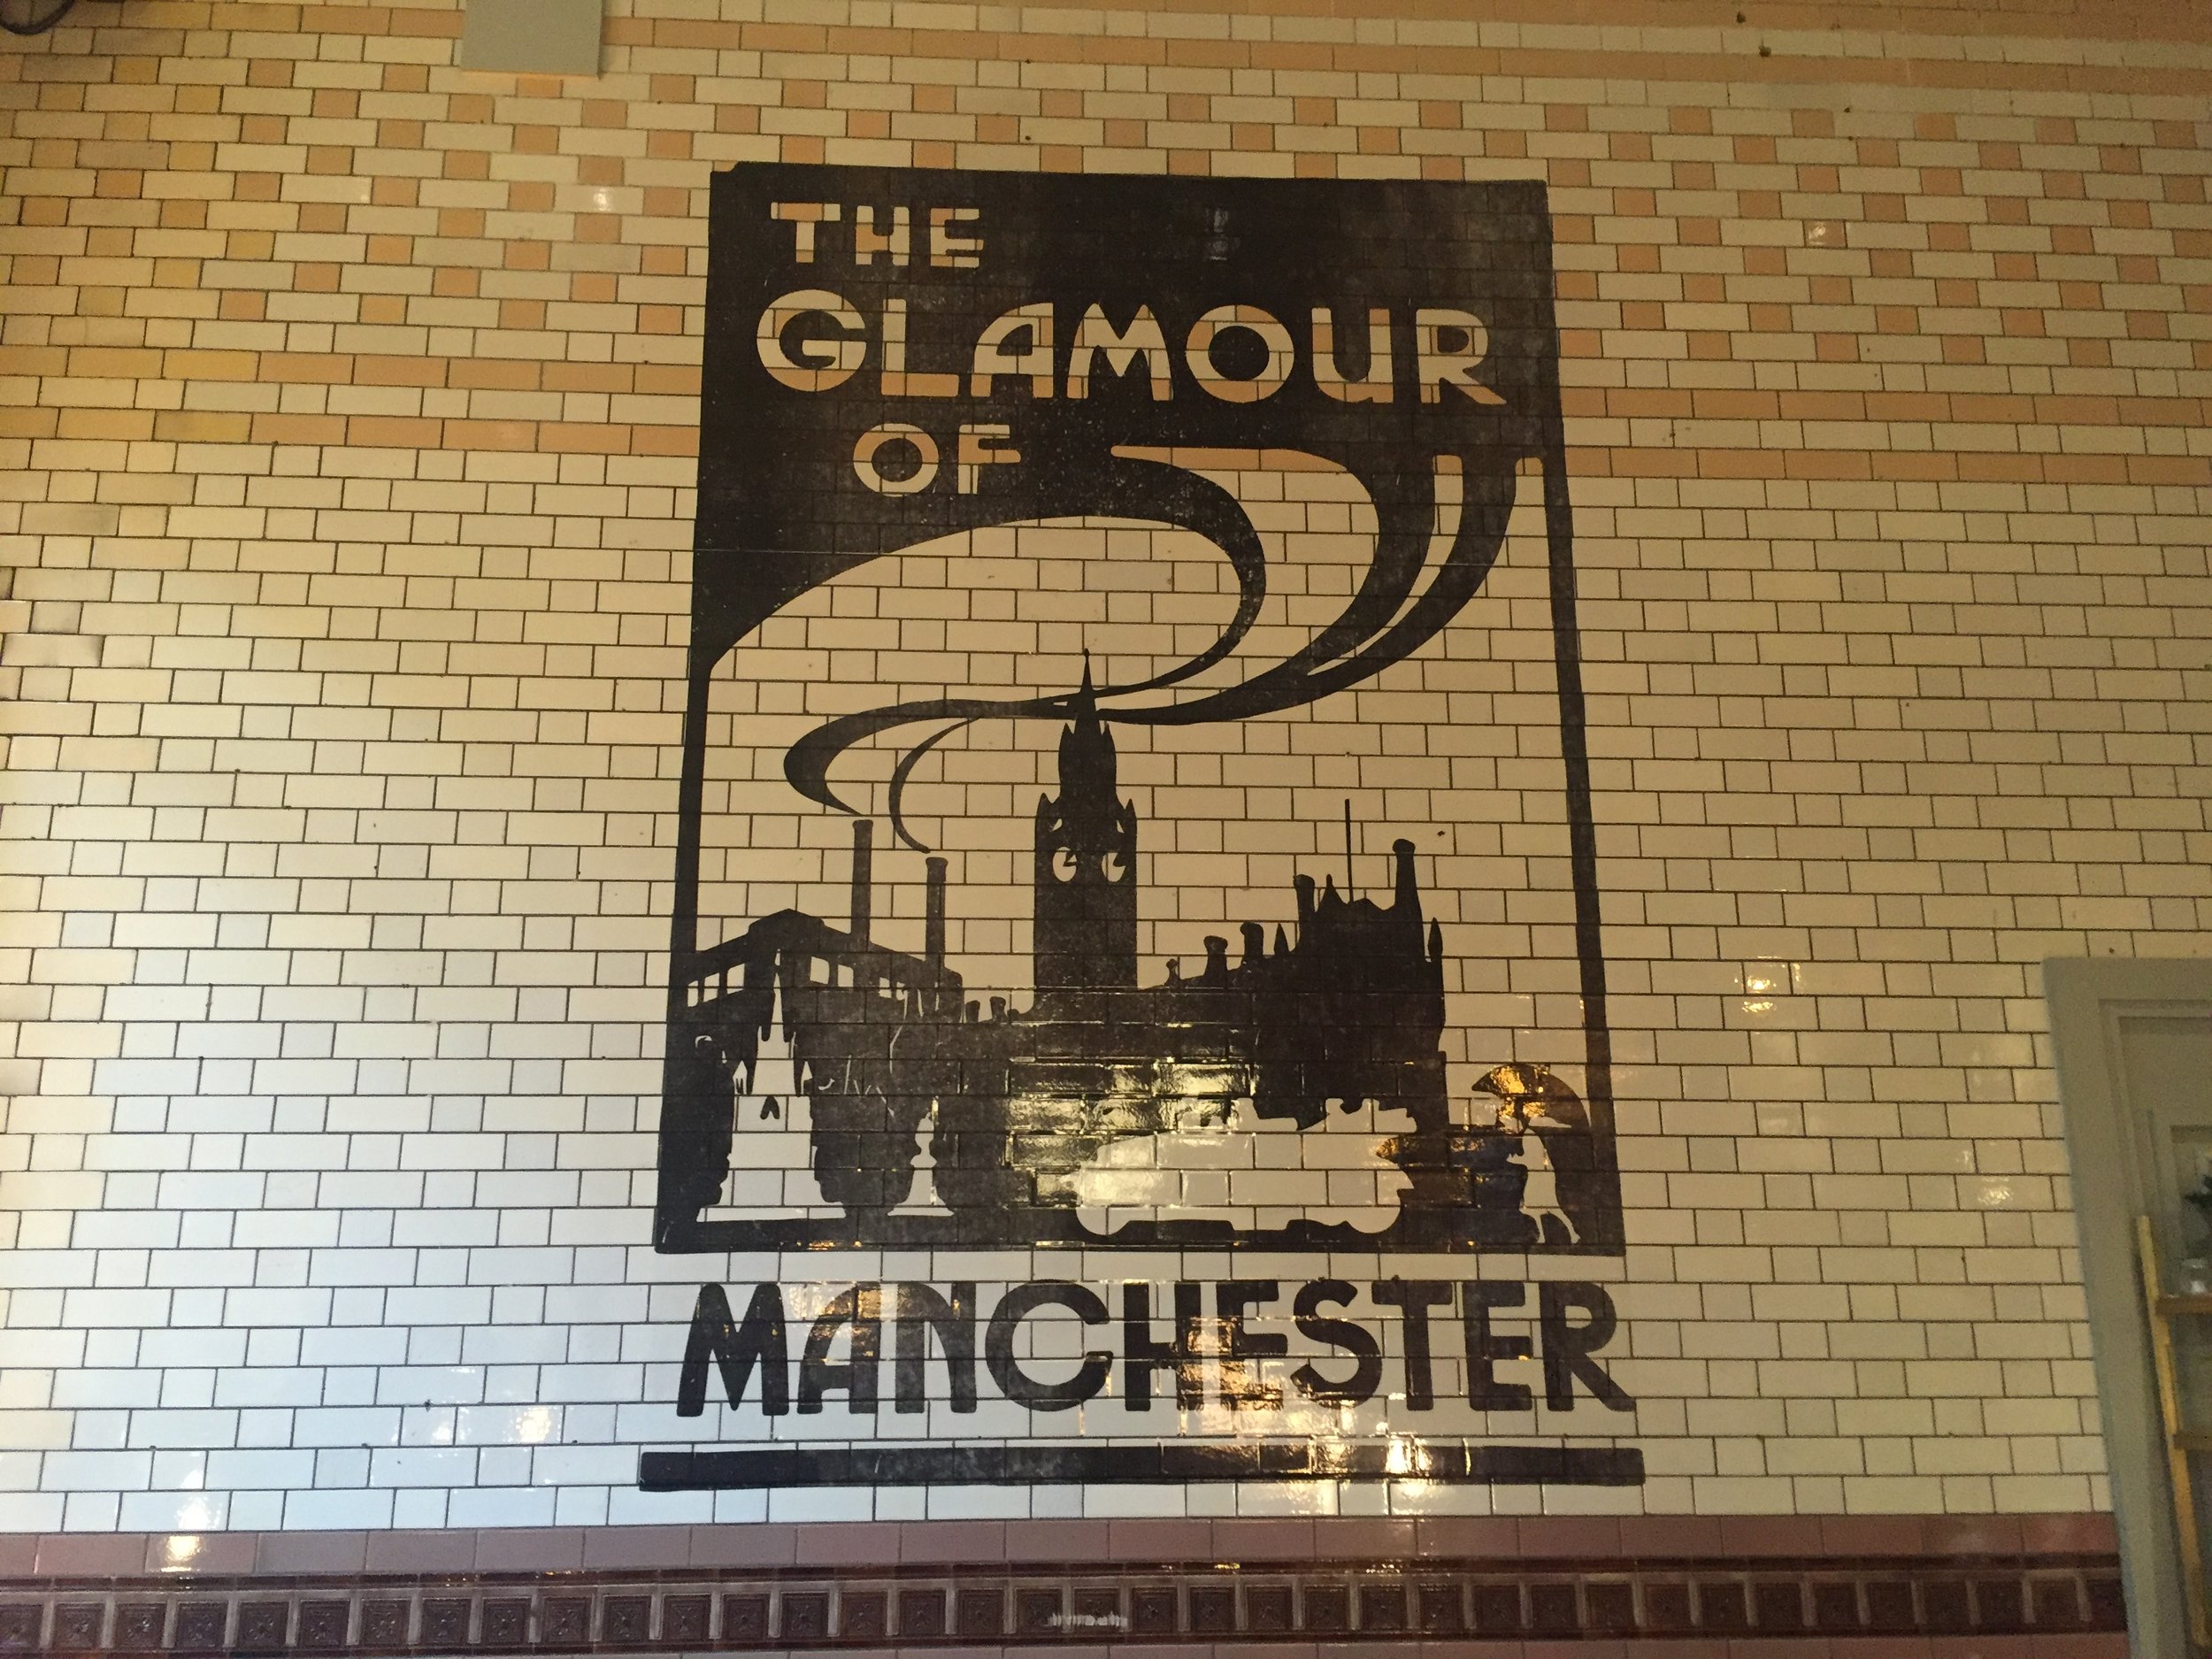  'The glamour of Manchester' mural at the Principal Hotel 